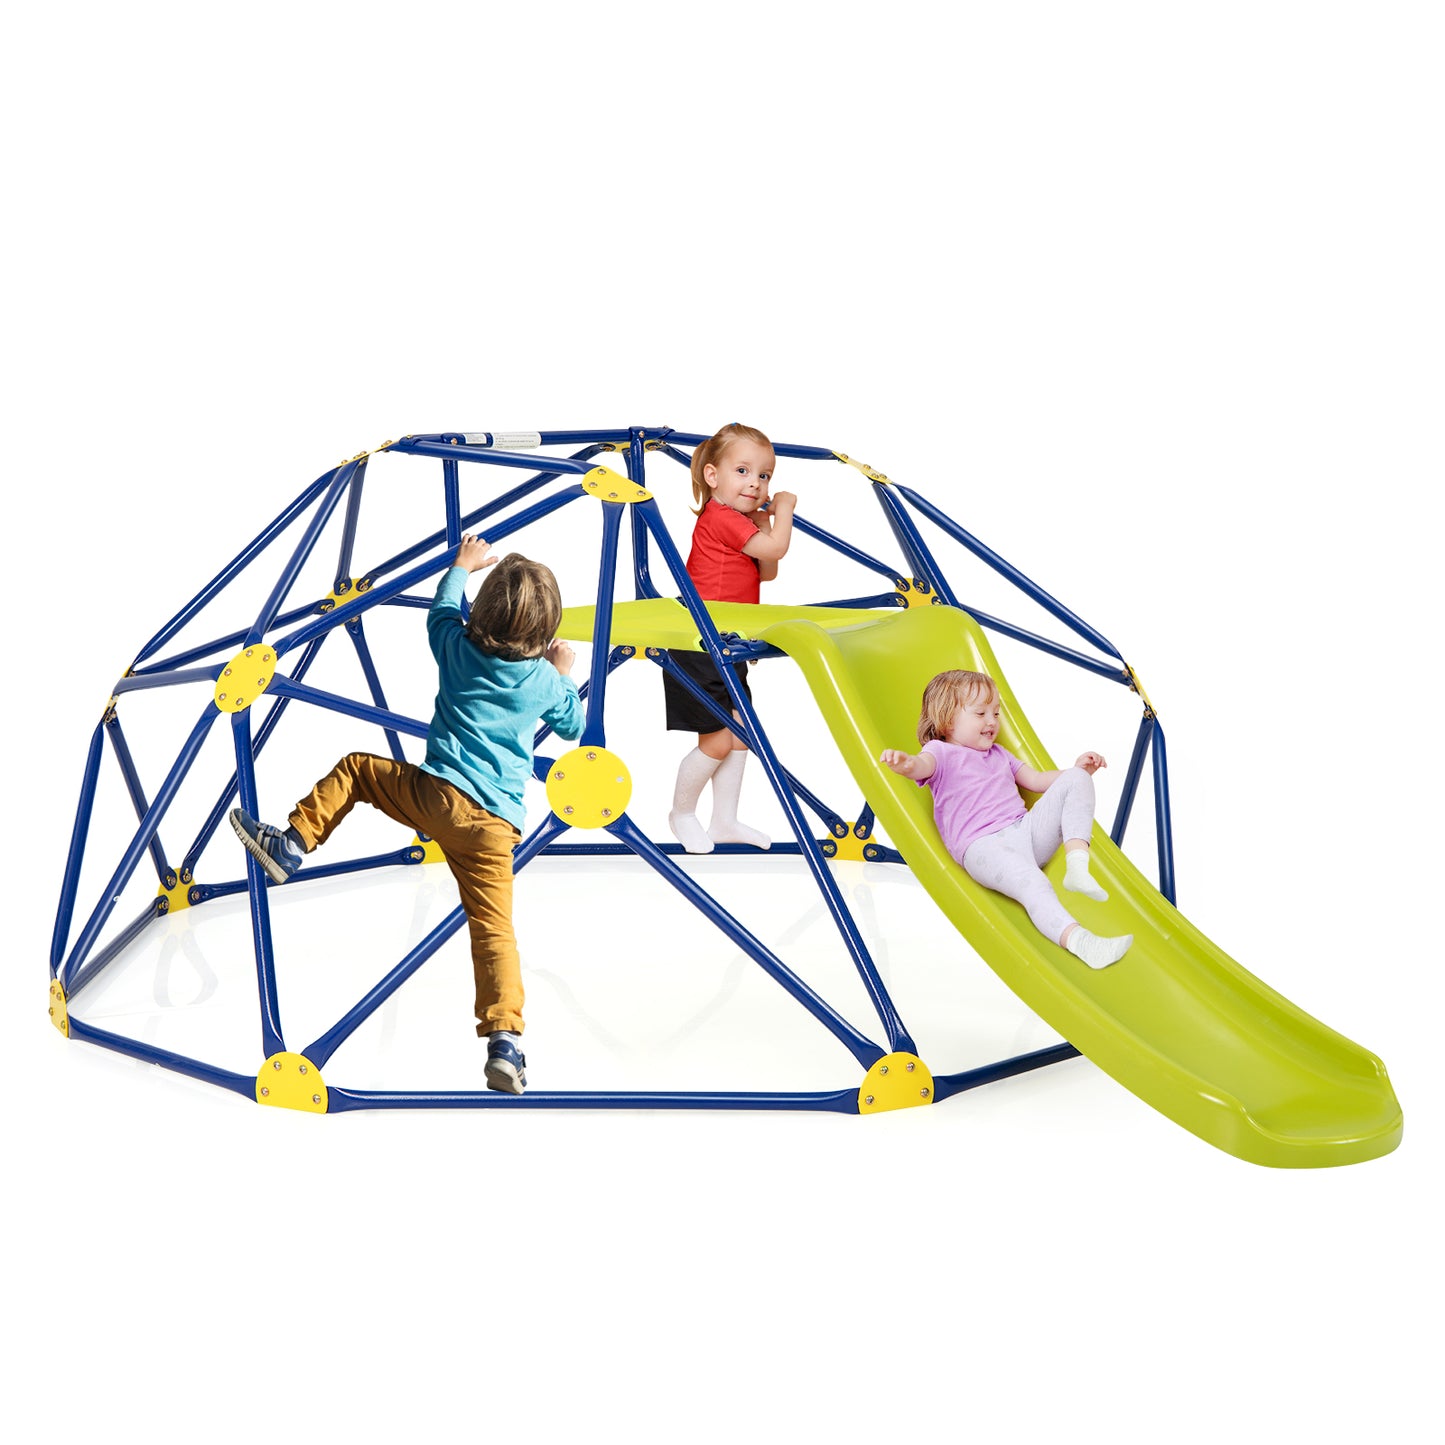 Kids Climbing Dome with Slide and Fabric Cushion for Garden Yard-Blue